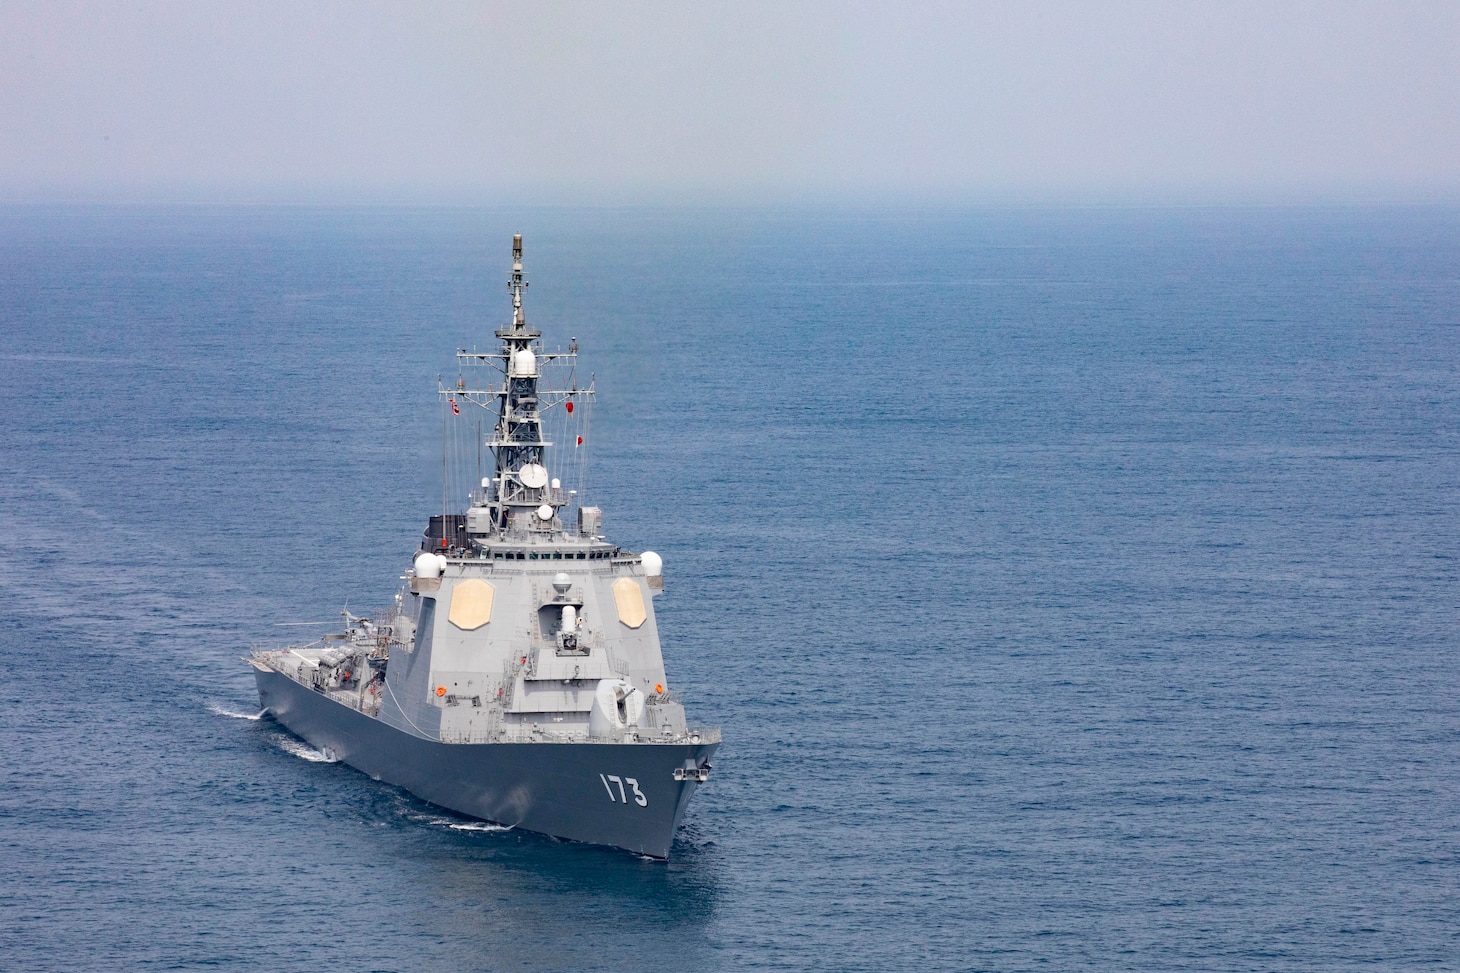 Japan Maritime Self-Defense Force (JMSDF) guided-missile destroyer JS Kongo (DDG-173) conducts a bilateral exercise with U.S. 7th Fleet flagship USS Blue Ridge (LCC 19) March 29, 2021 in the East China Sea. These types of operations provide an opportunity for each partner nation to share their unique capabilities in shipboard maneuvering procedures, maritime skills and interoperability. Blue Ridge is the oldest operational ship in the Navy and, as 7th Fleet command ship, actively works to foster relationships with allies and partners in the Indo-Pacific region.